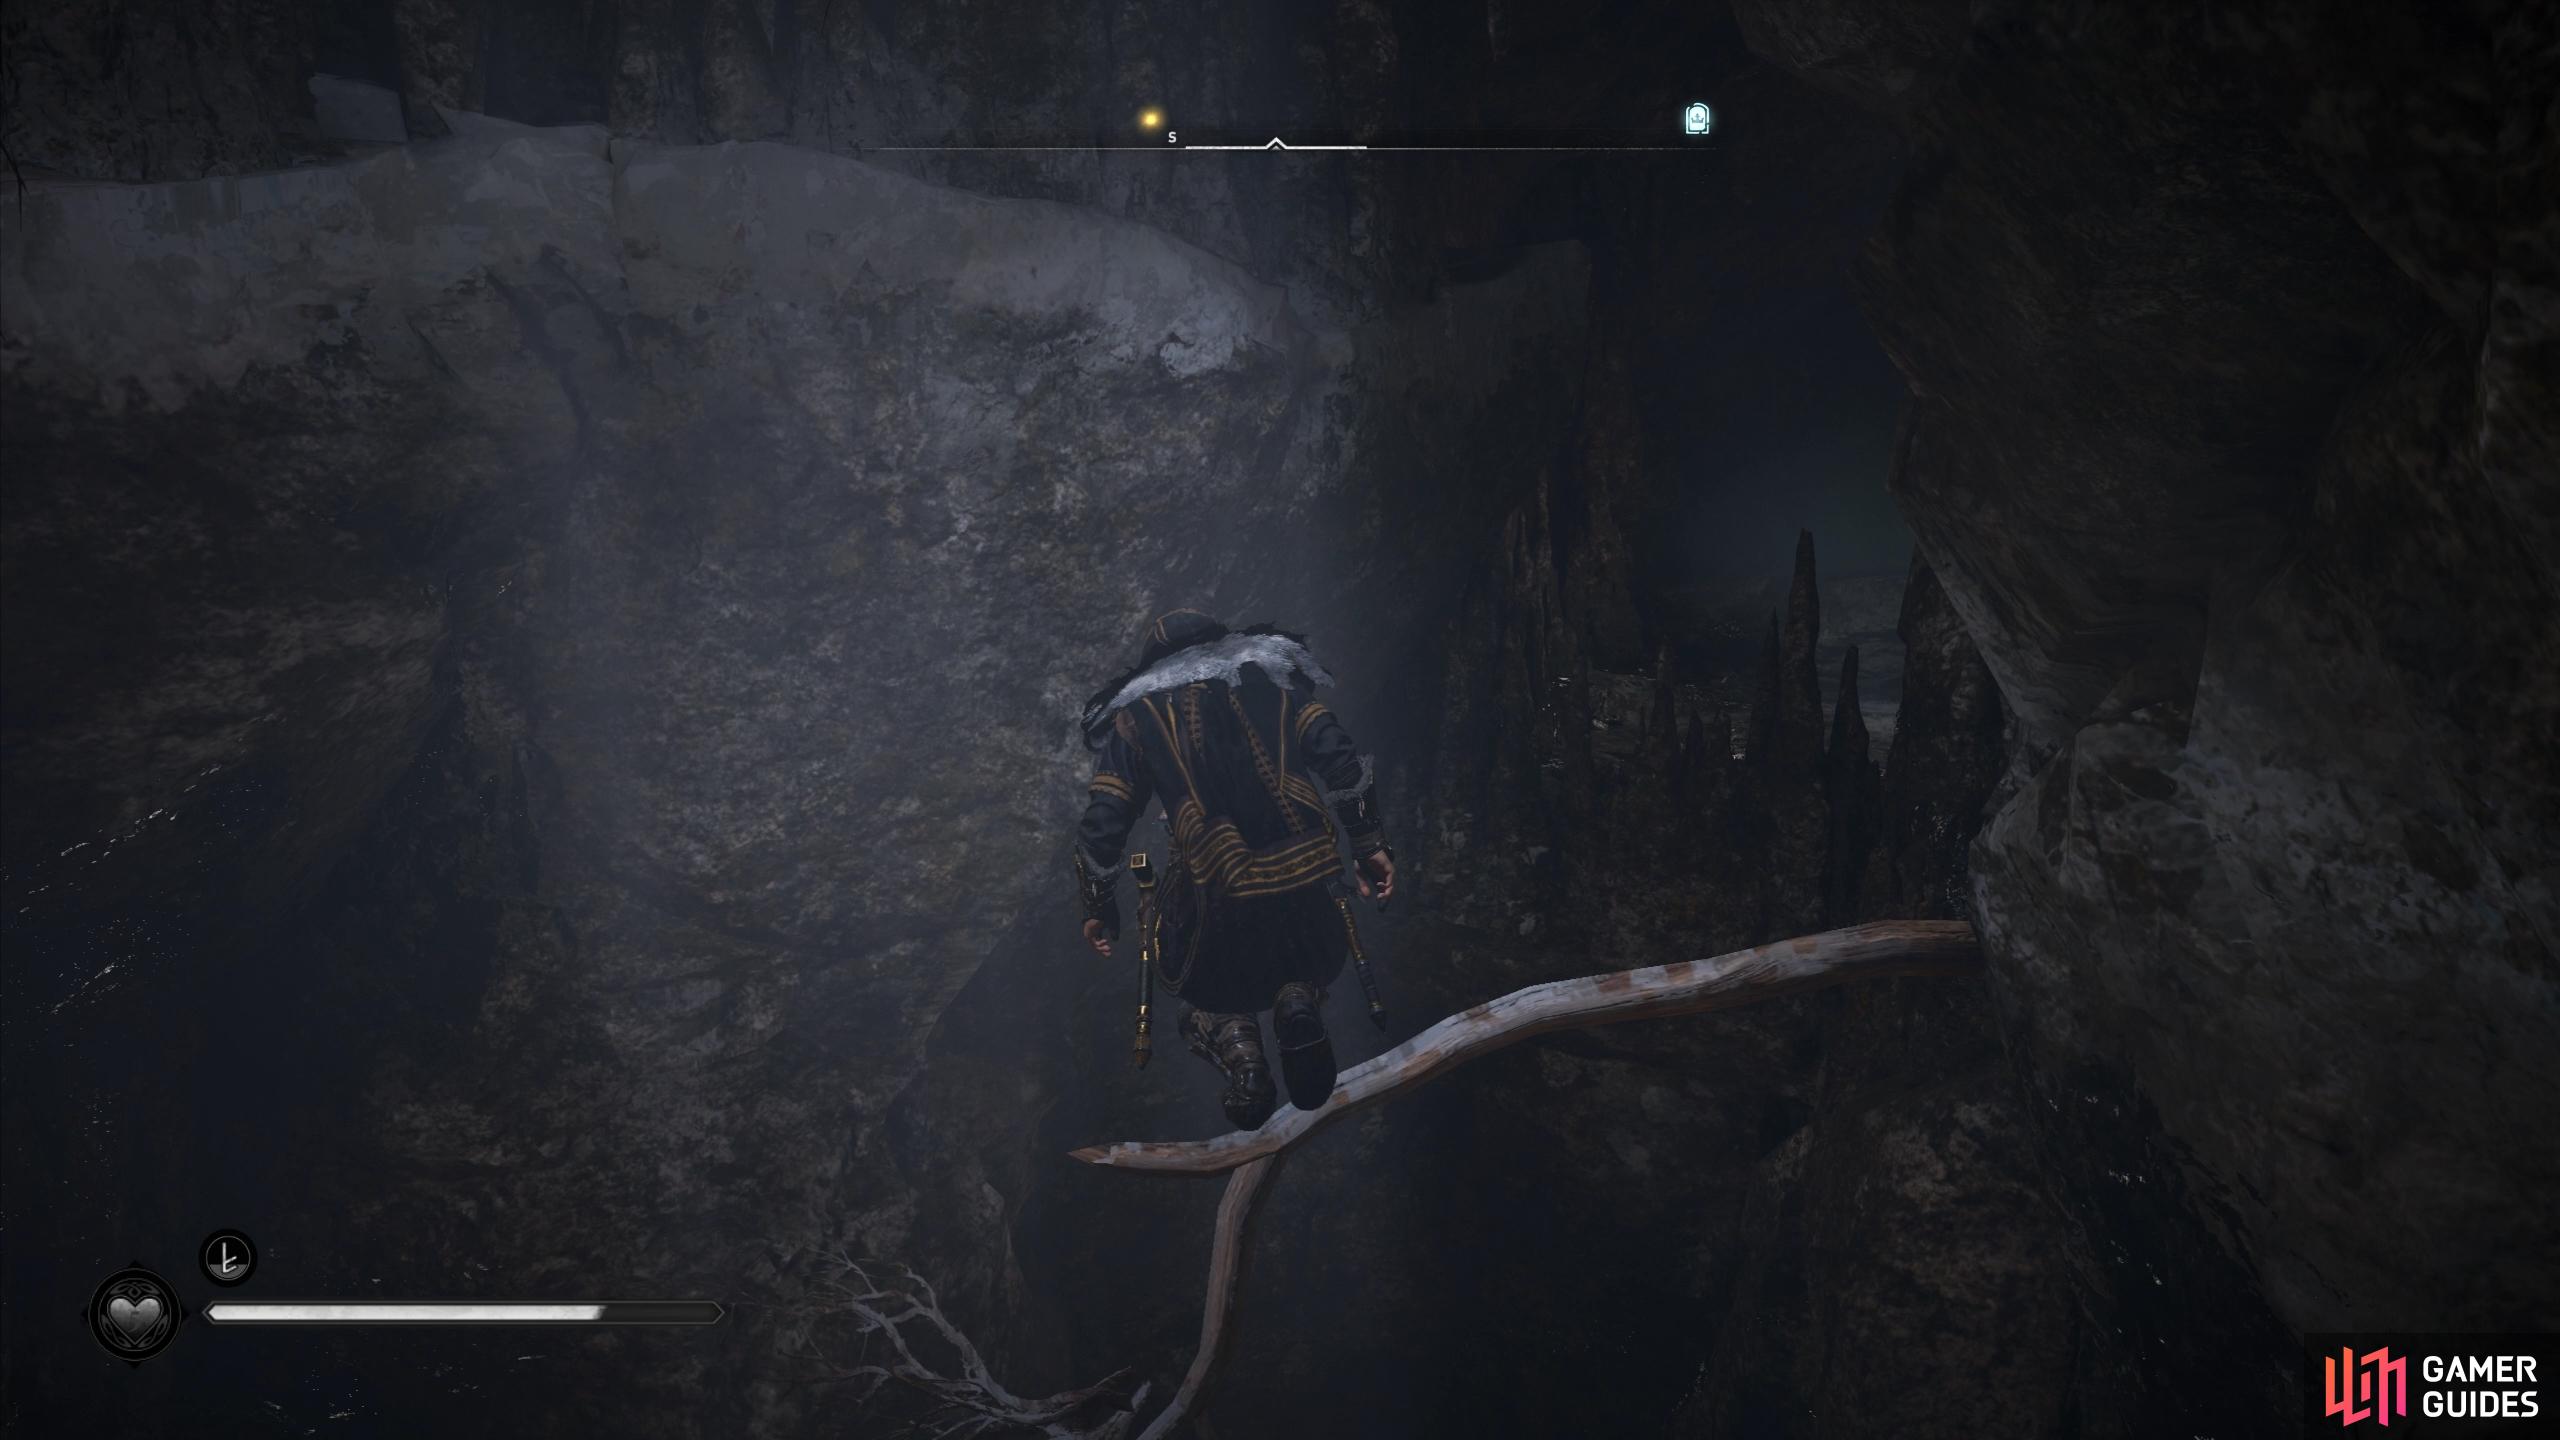 You'll need to jump to the branch jutting out of the rock to reach the other side of the cavern.